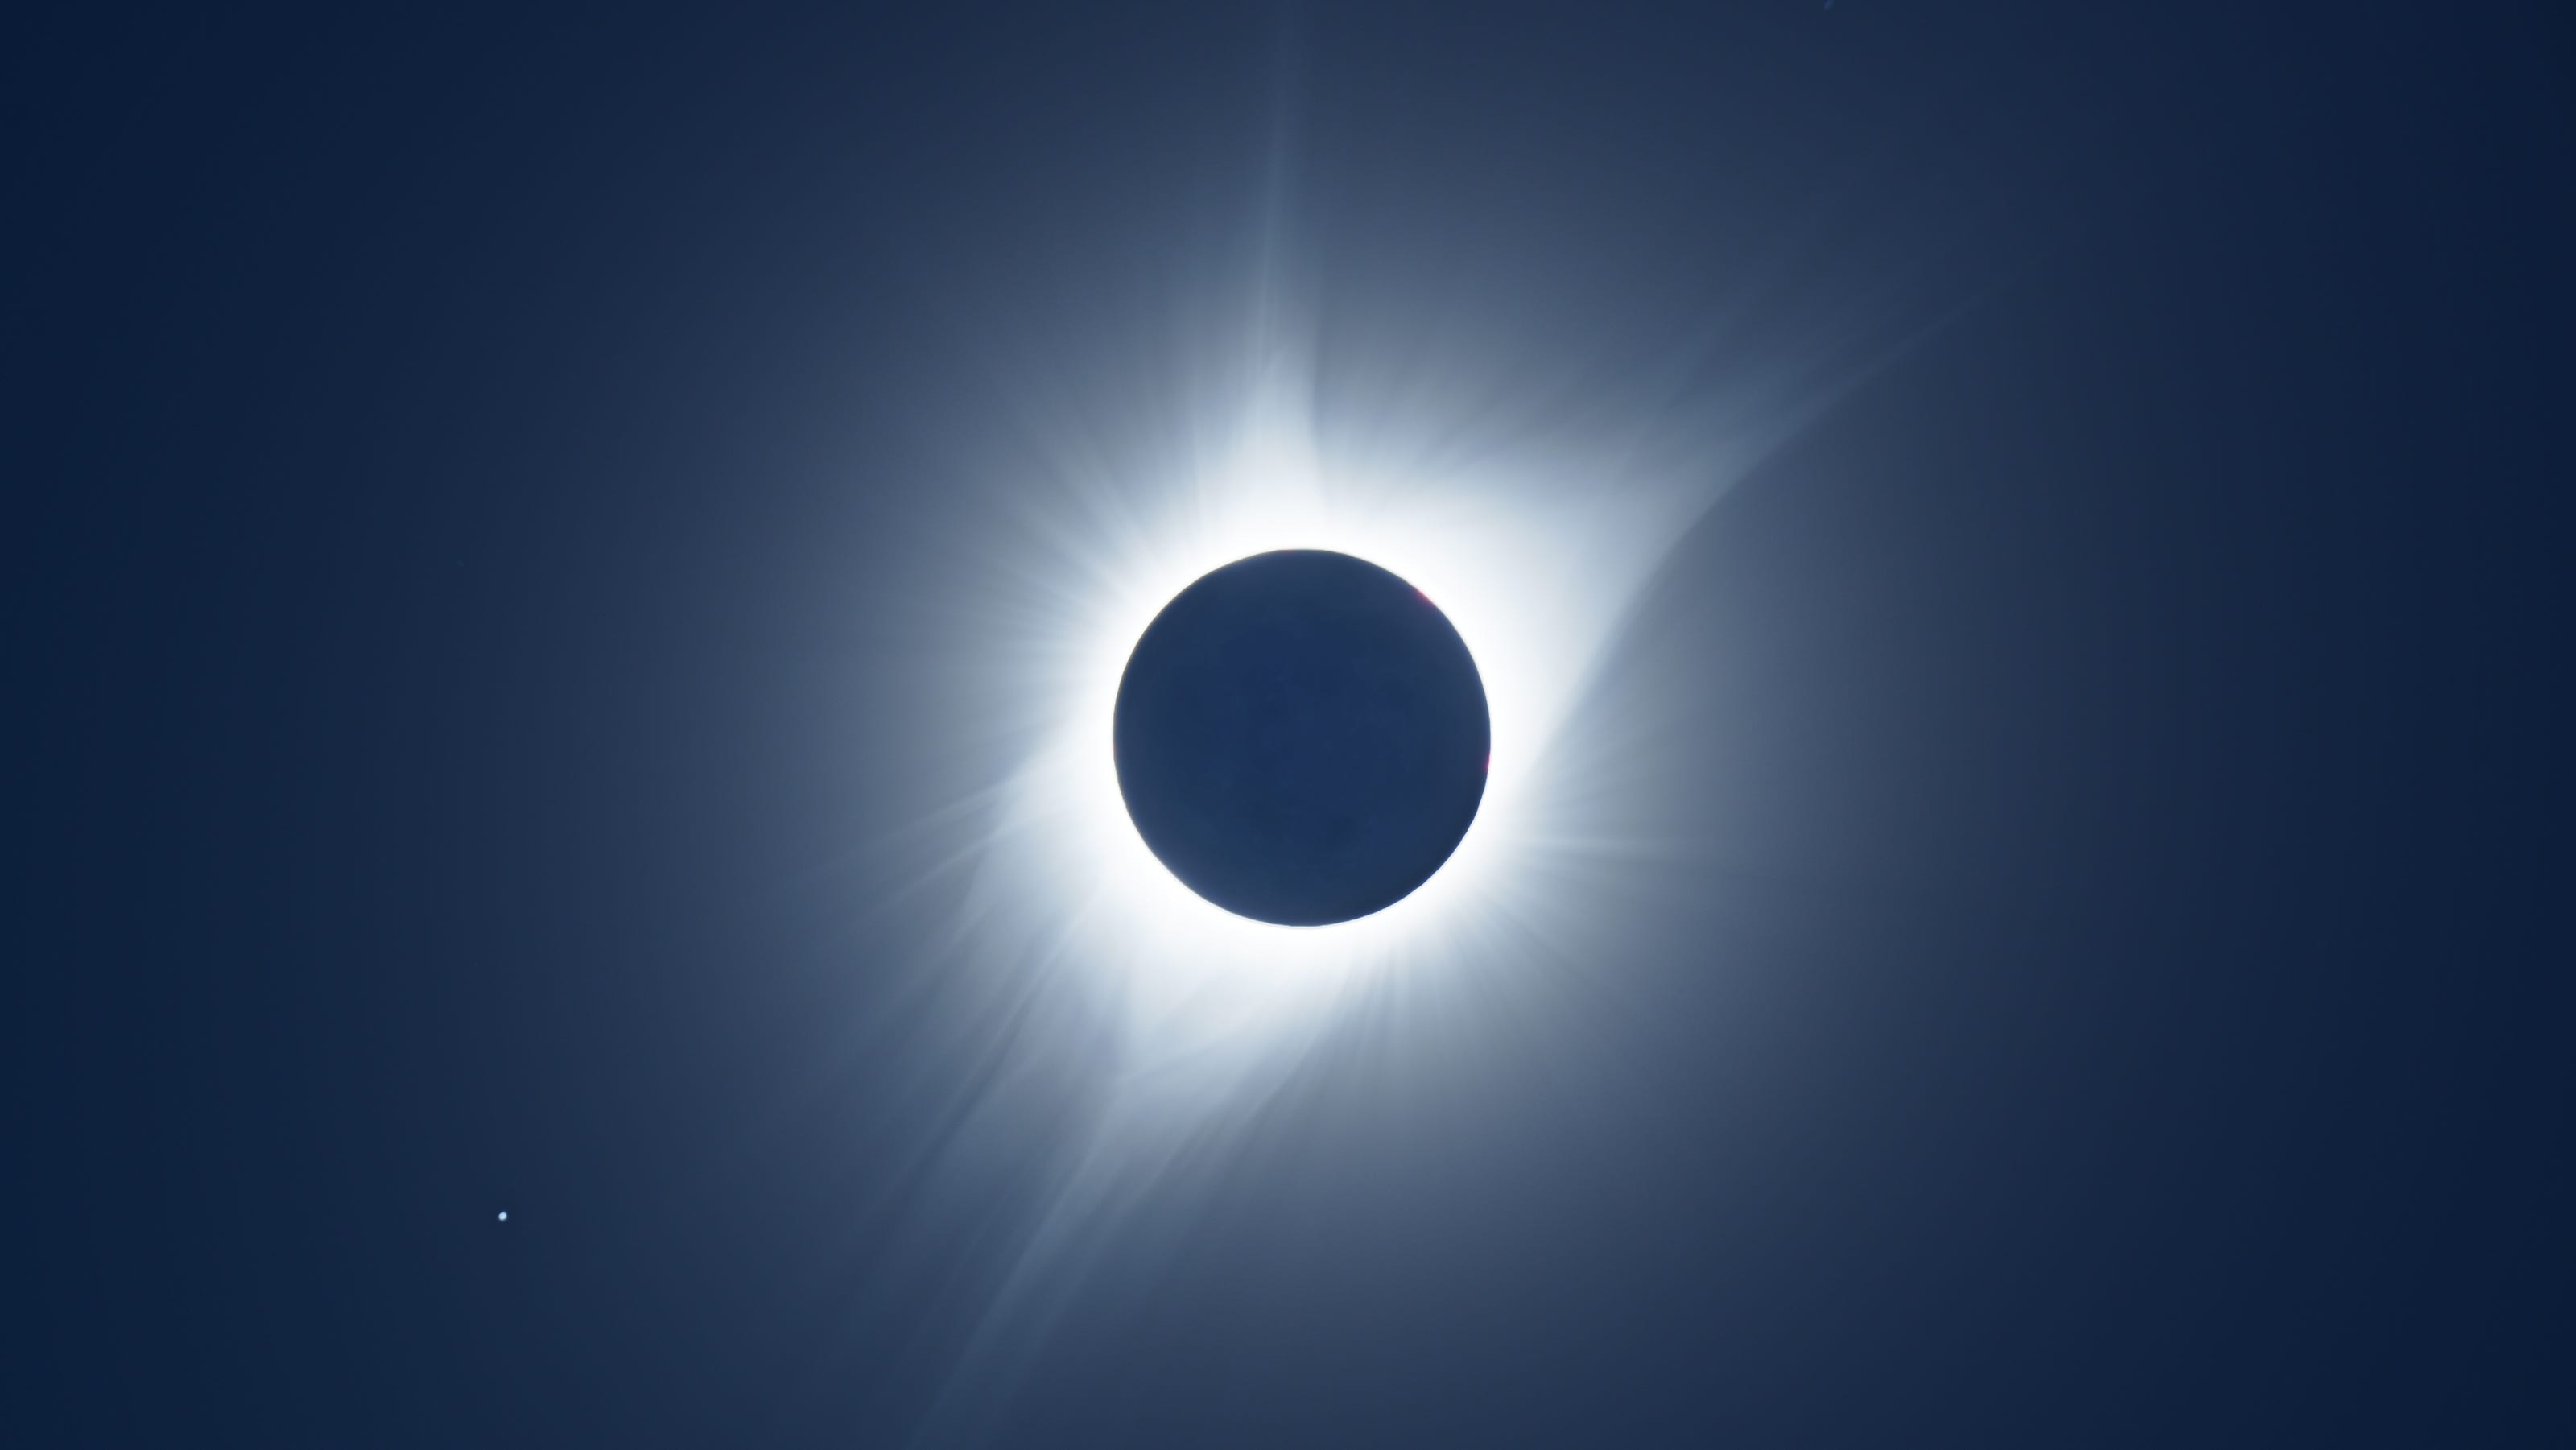  Solar eclipse forecast: What the weather may look like in central Illinois 